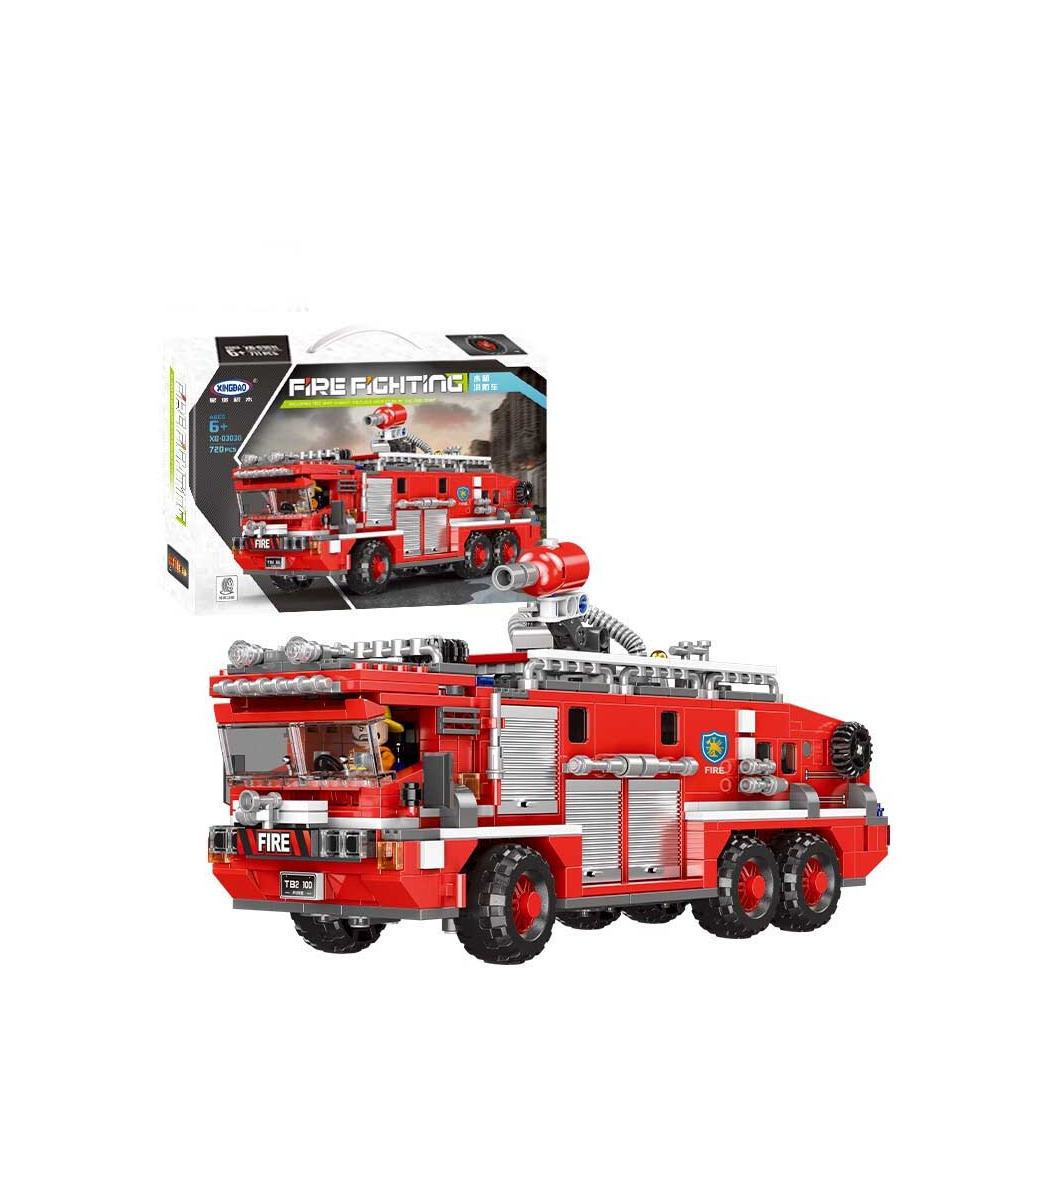 410pcs Water Tank Fire Fighting Truck Building Blocks with Fireman Figures Toys